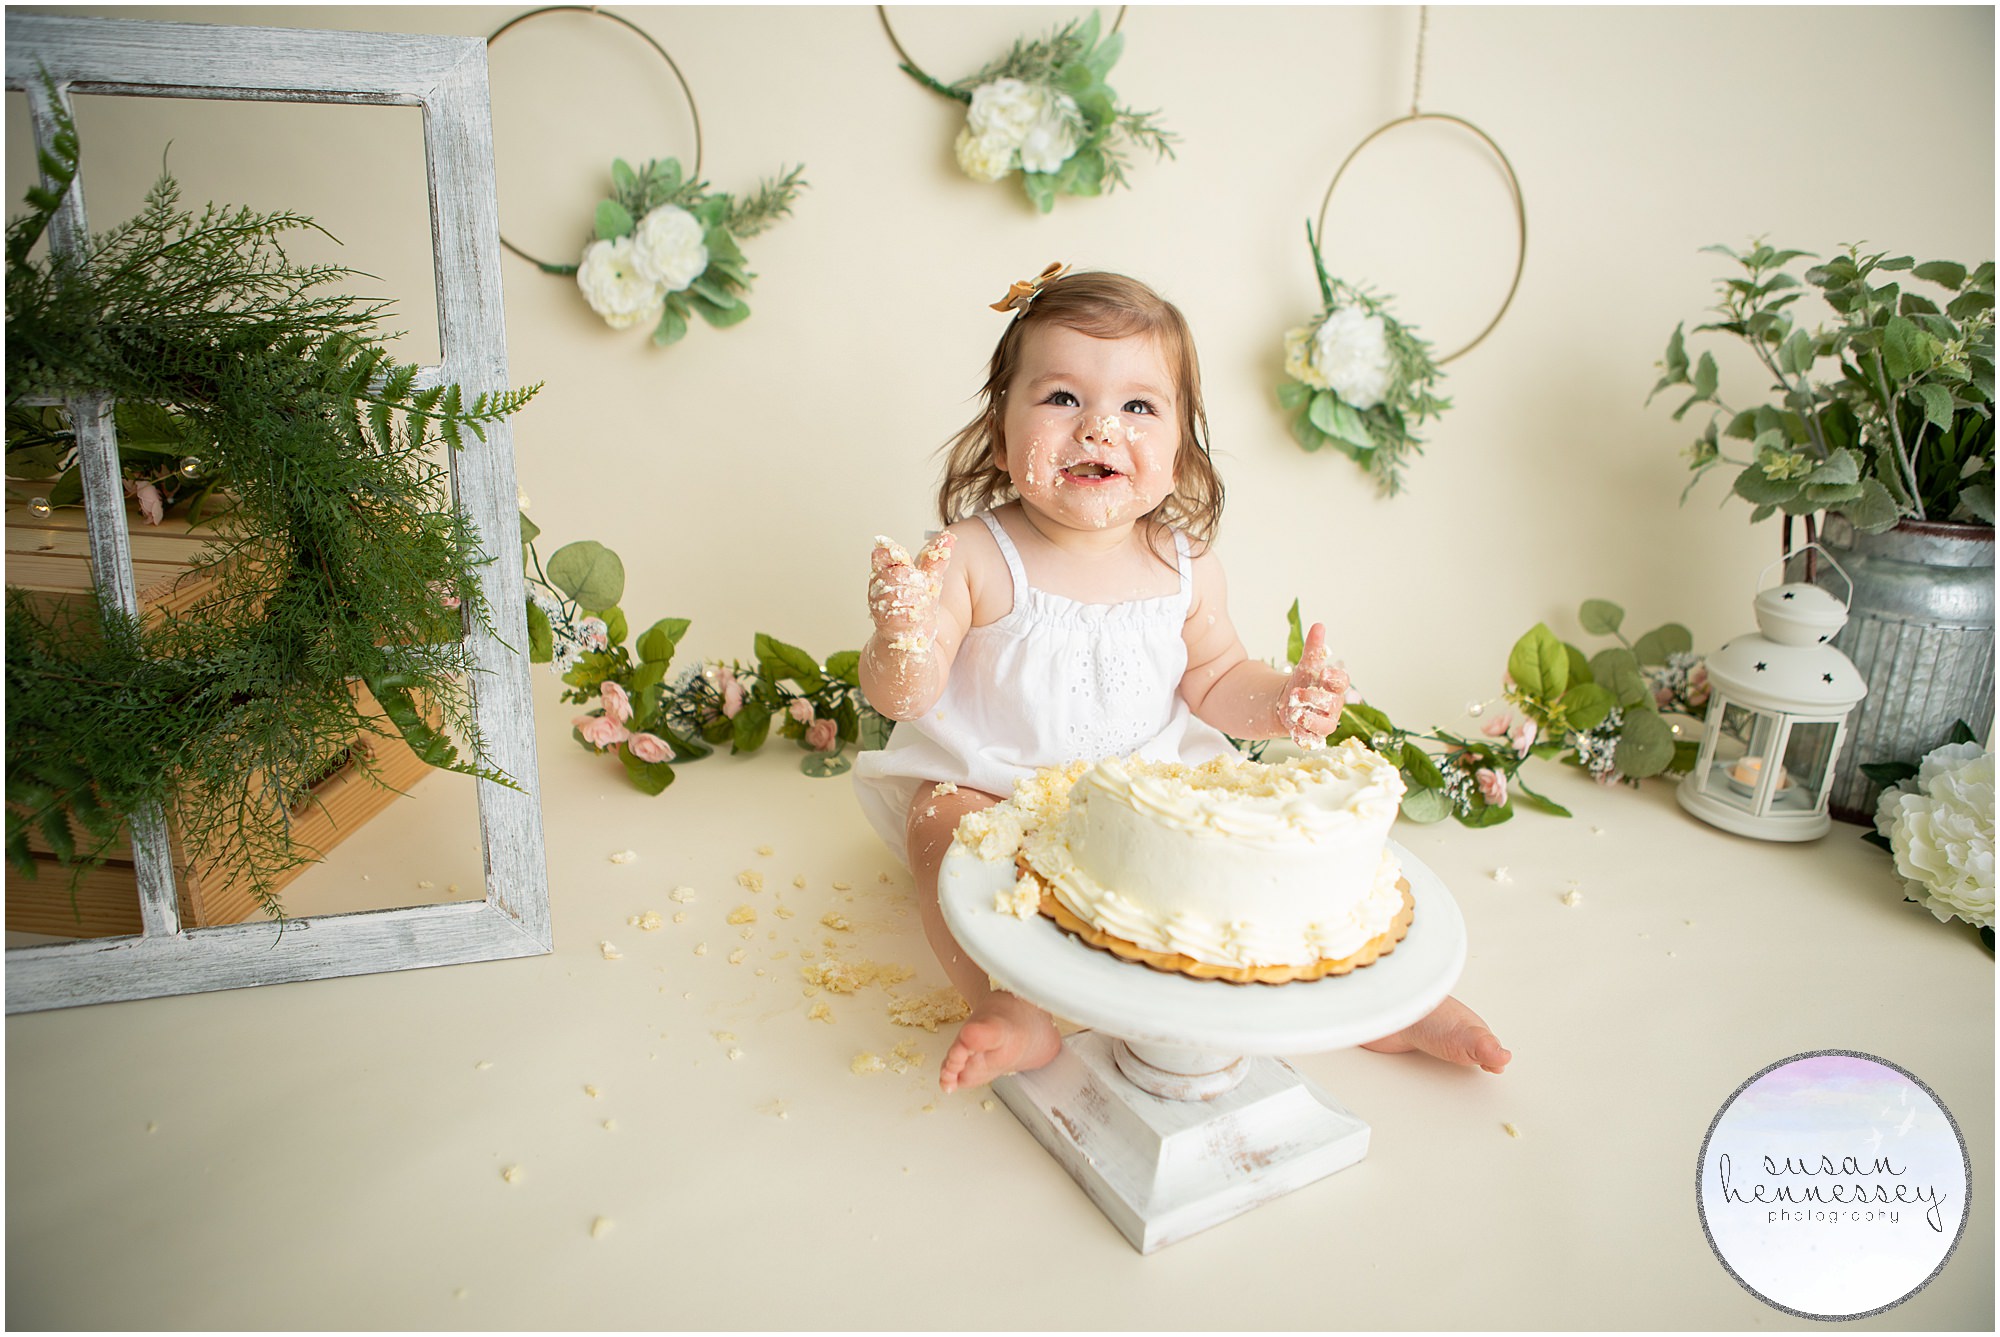 Cake smash session filled with greenery and white color palette